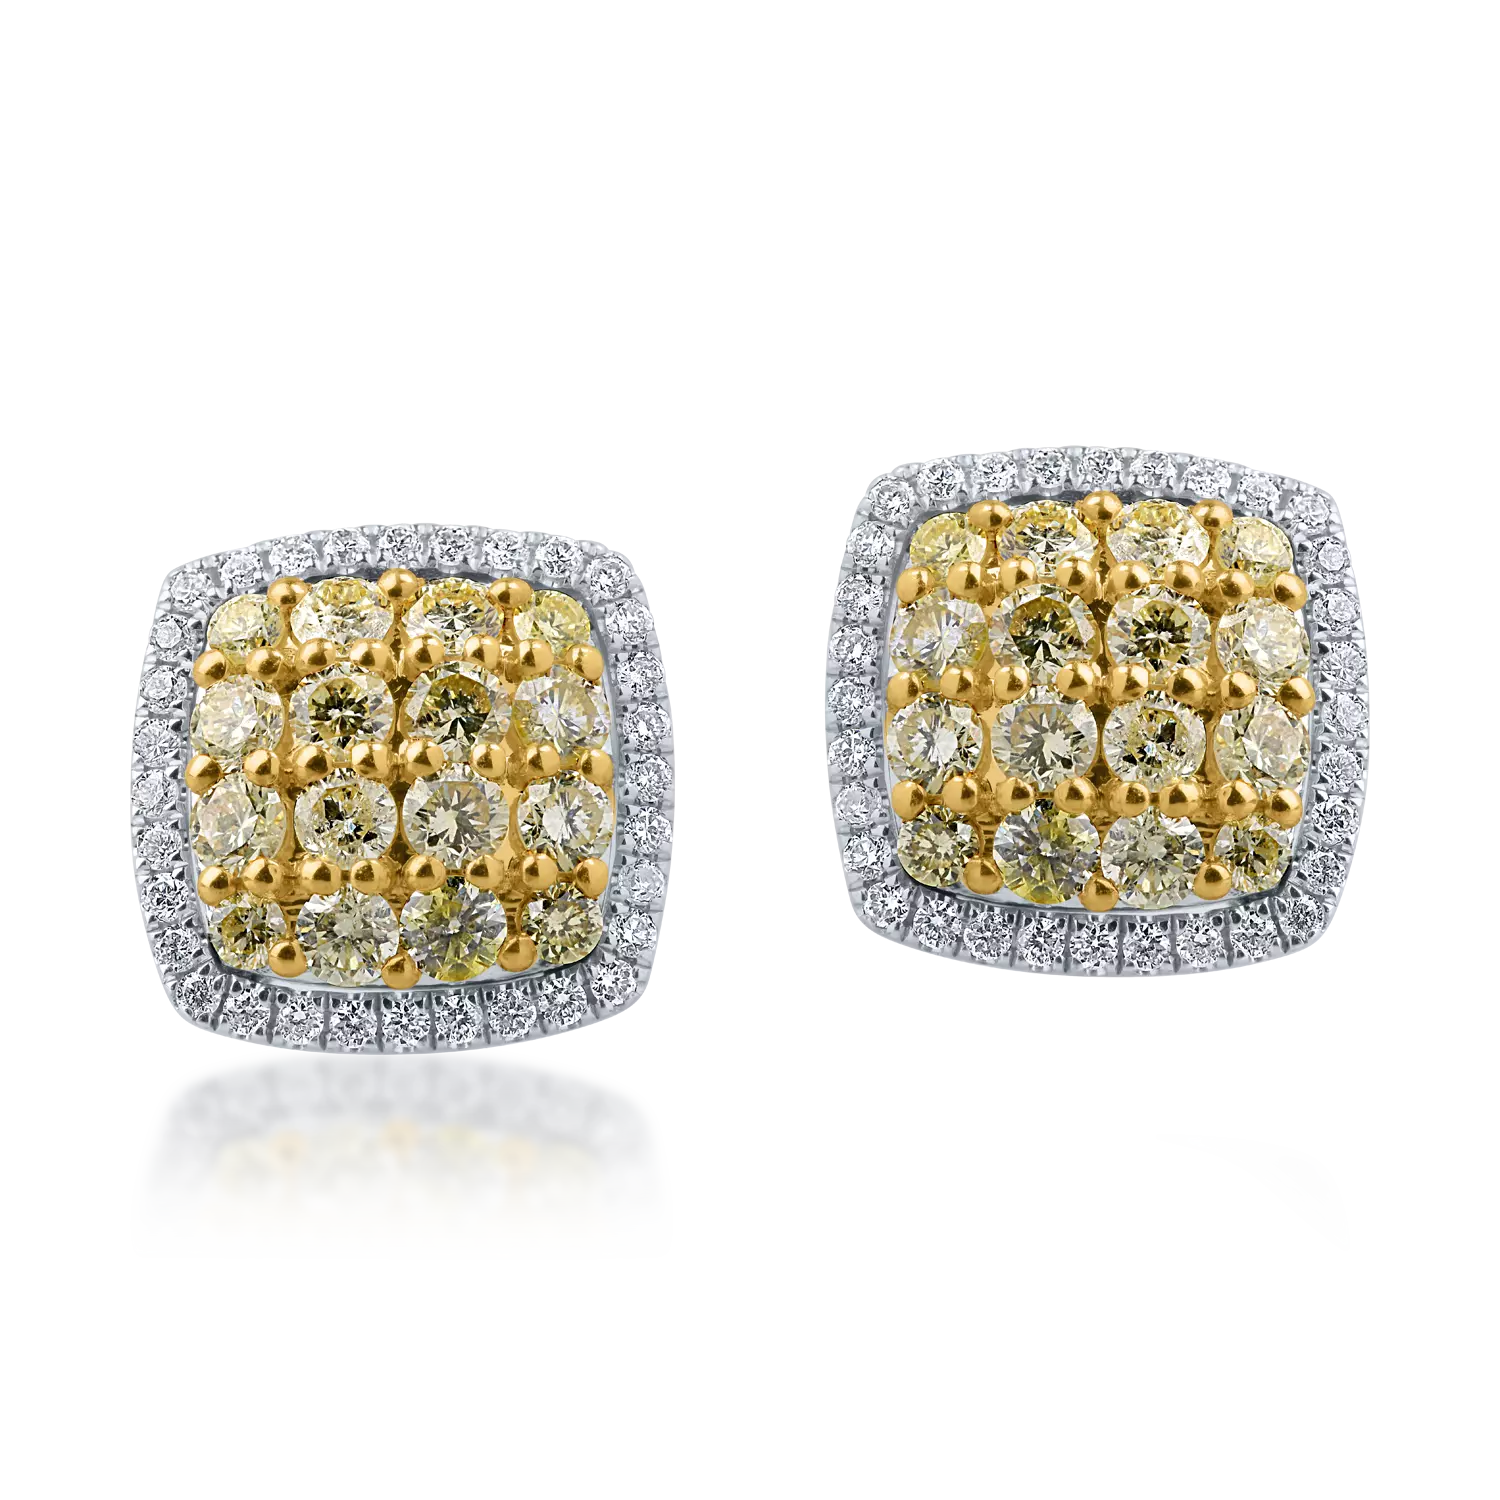 White-yellow gold earrings with 0.99ct yellow diamonds and 0.24ct clear diamonds